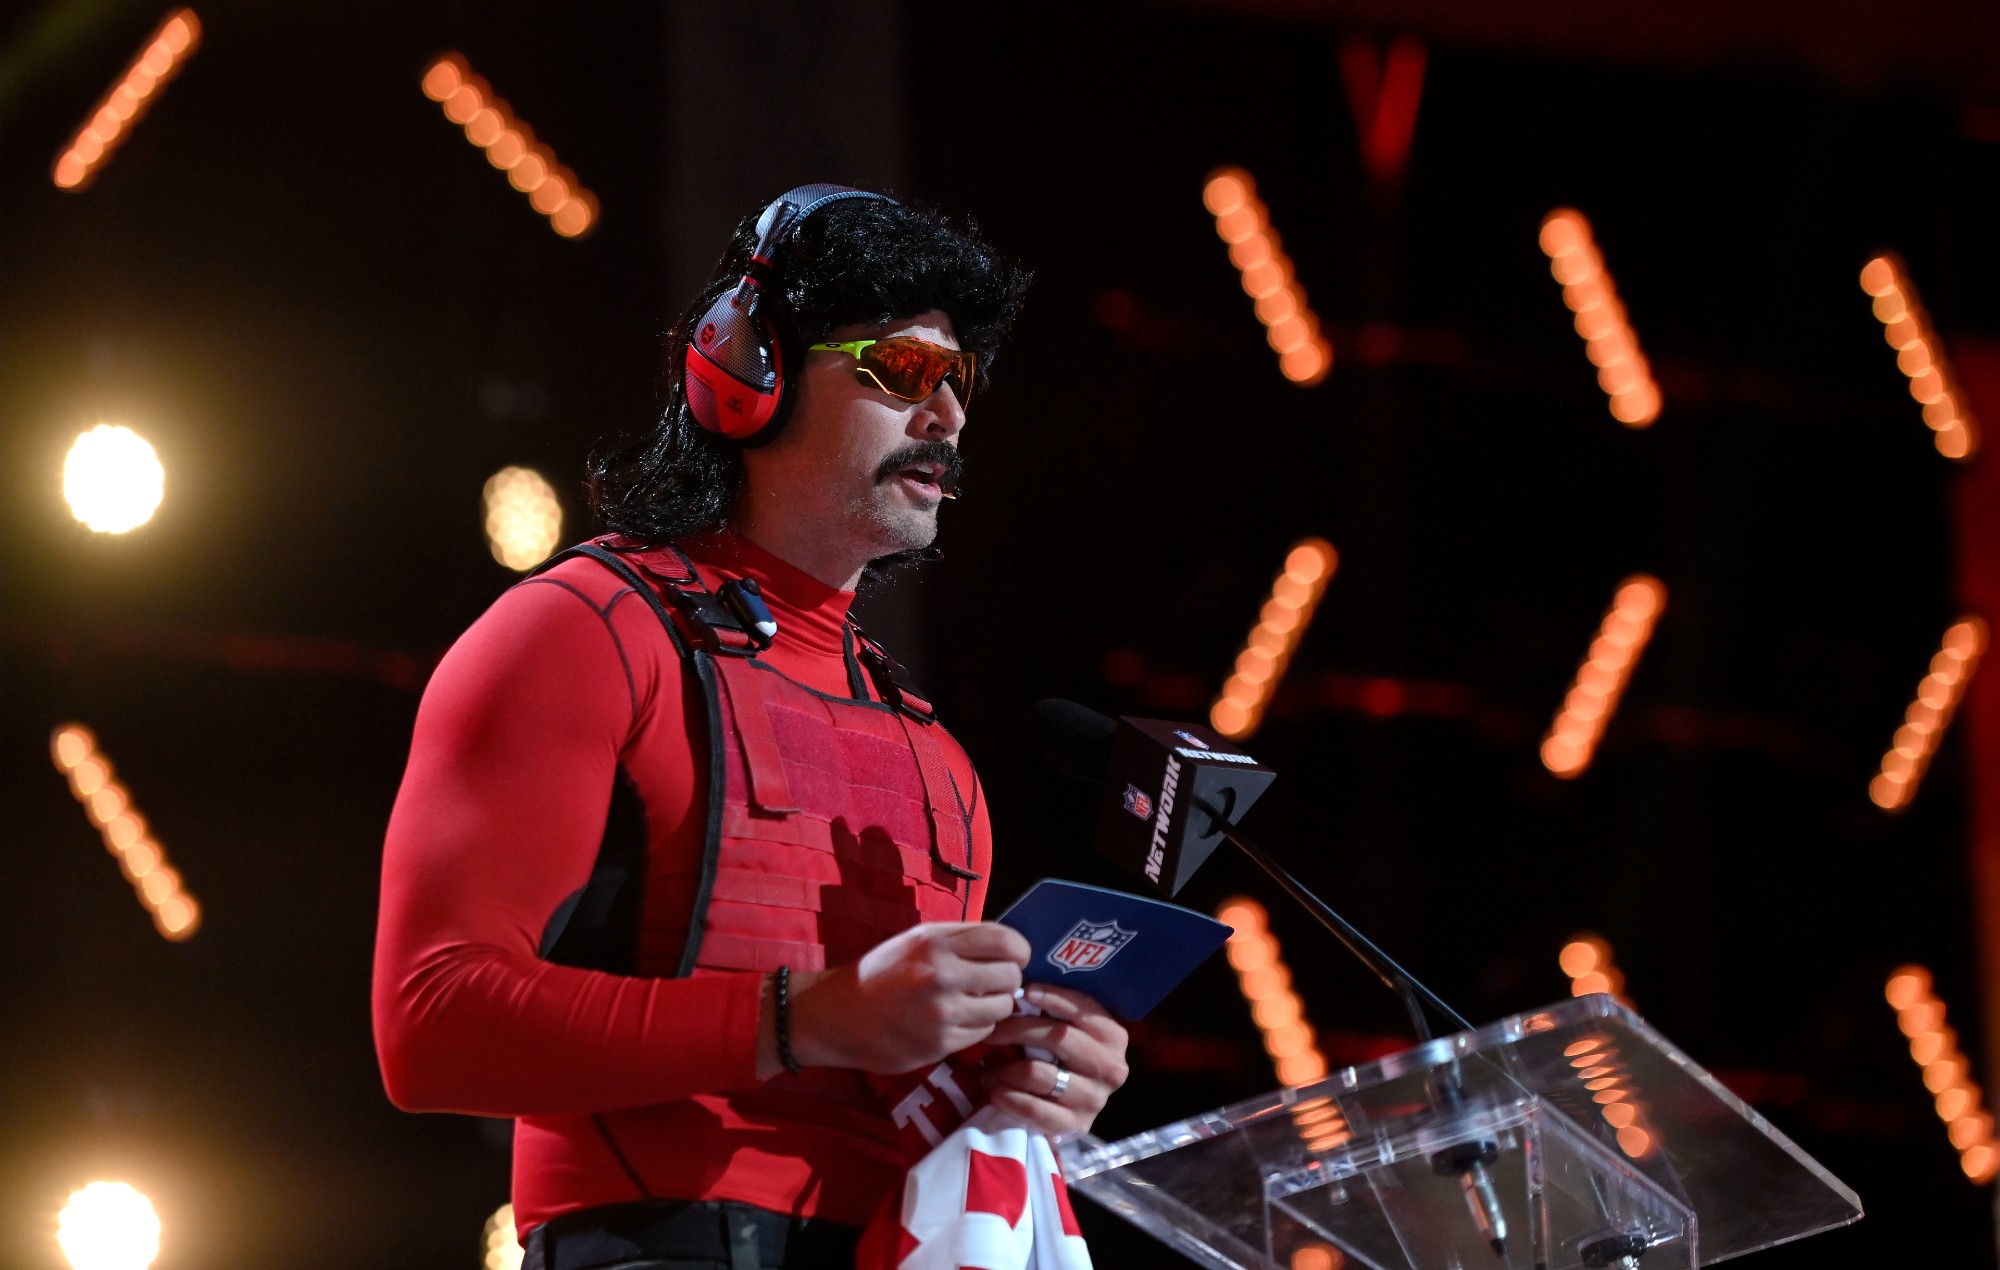 Who is Dr Disrespect – and what has he been accused of?